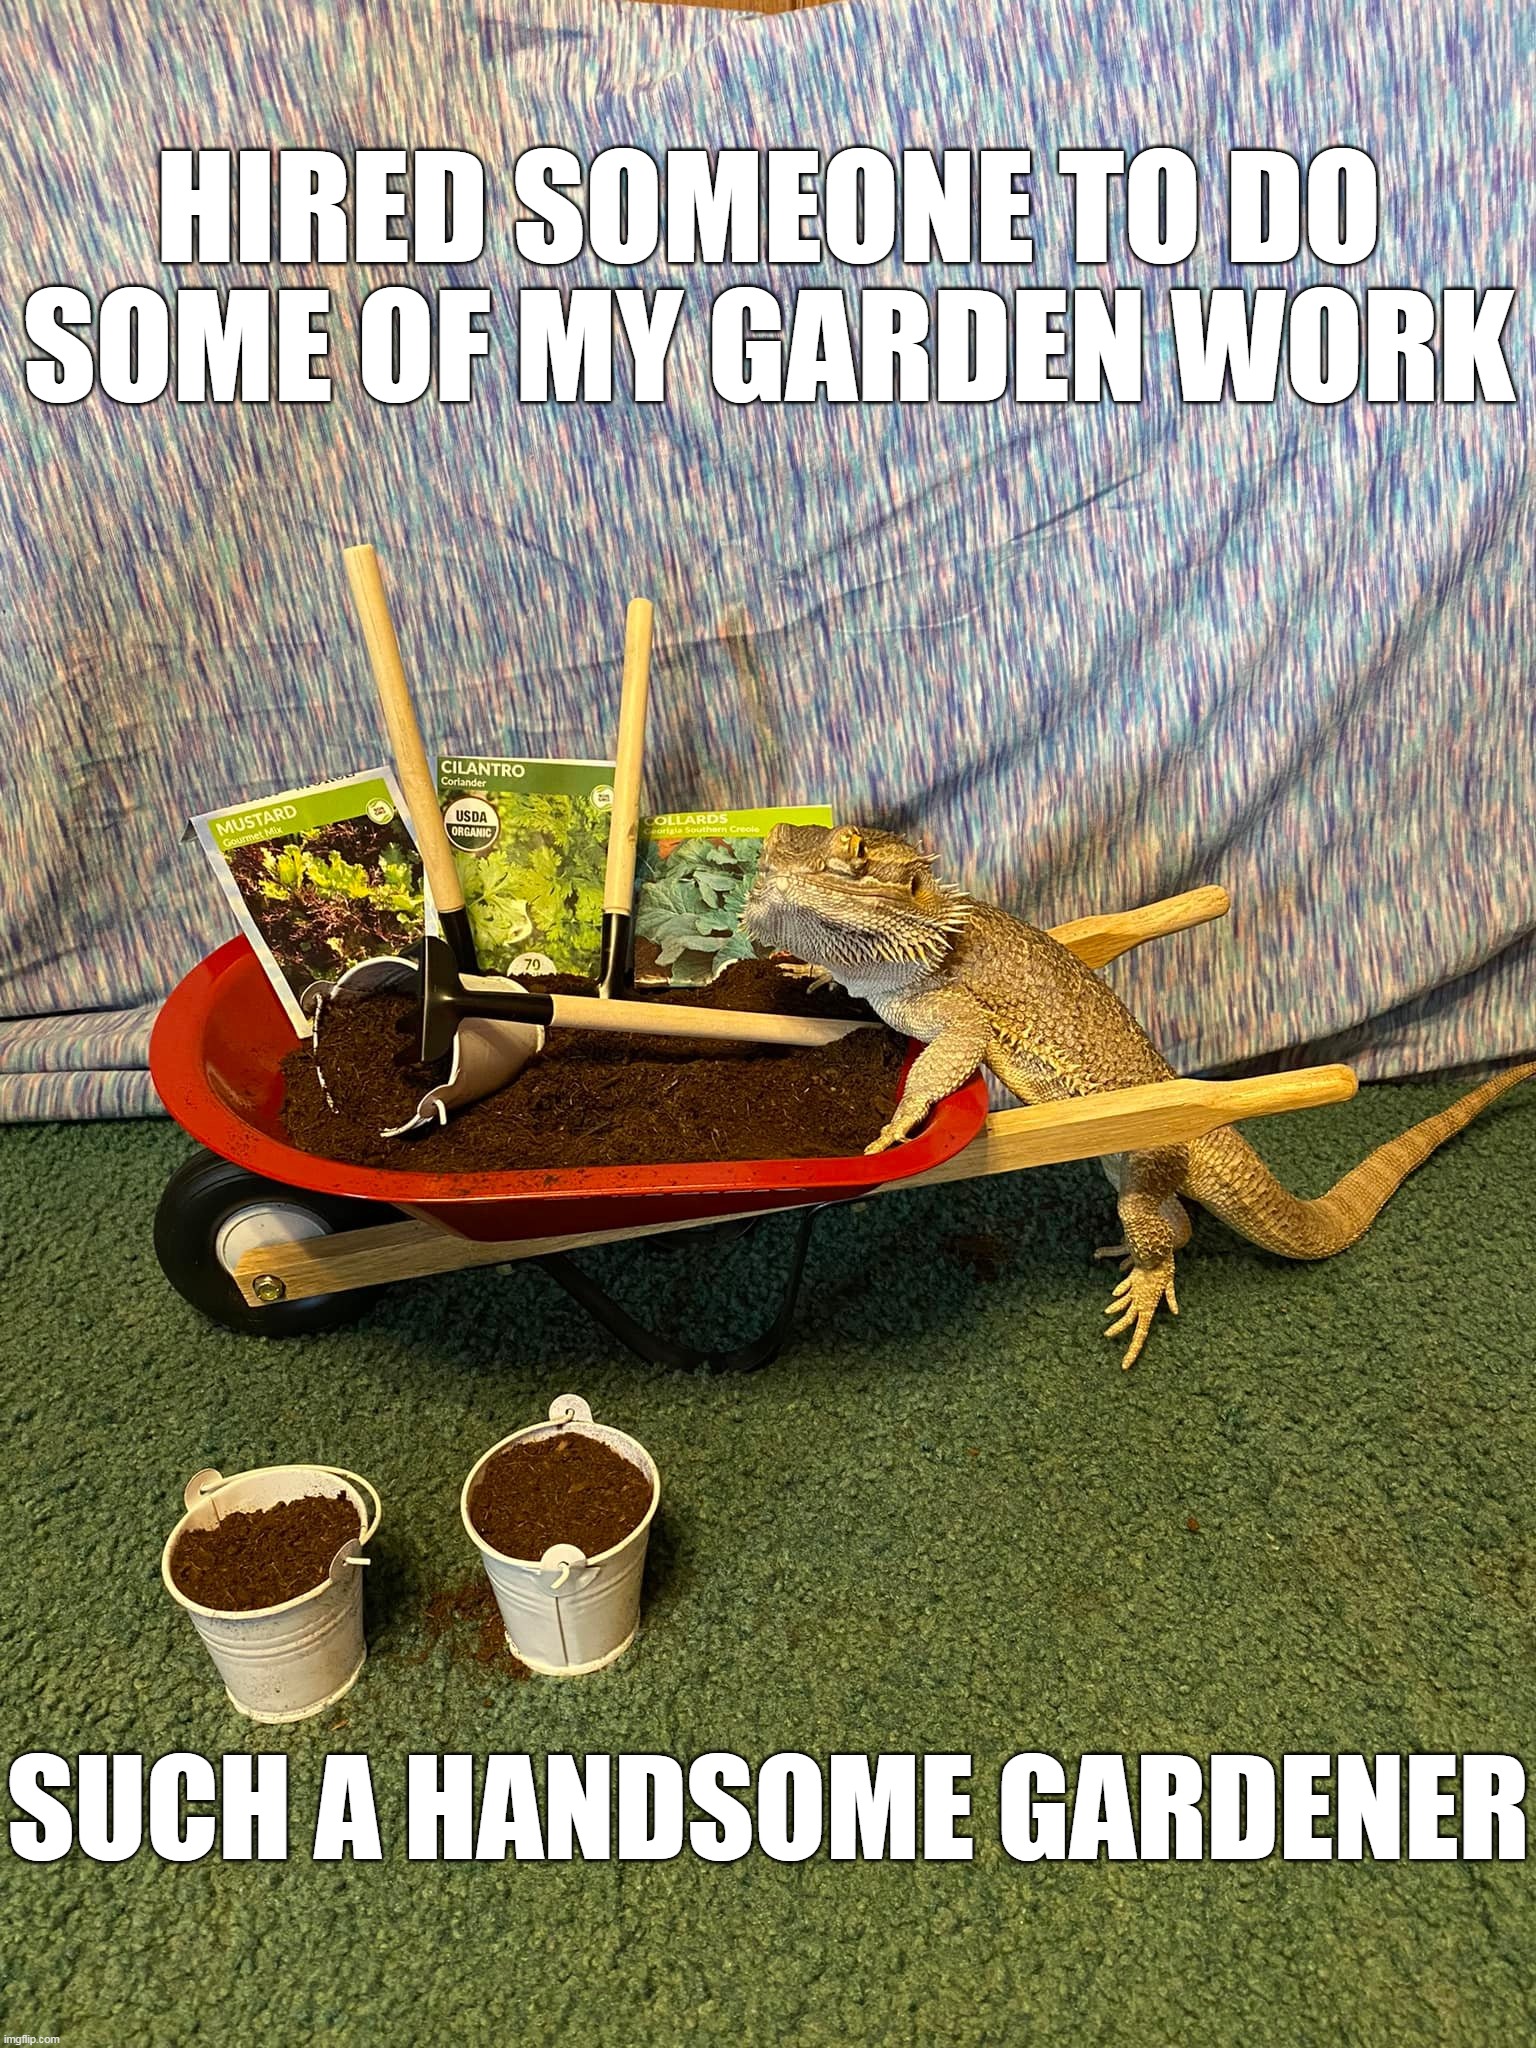 HIRED SOMEONE TO DO SOME OF MY GARDEN WORK; SUCH A HANDSOME GARDENER | image tagged in meme,memes,humor,animals | made w/ Imgflip meme maker